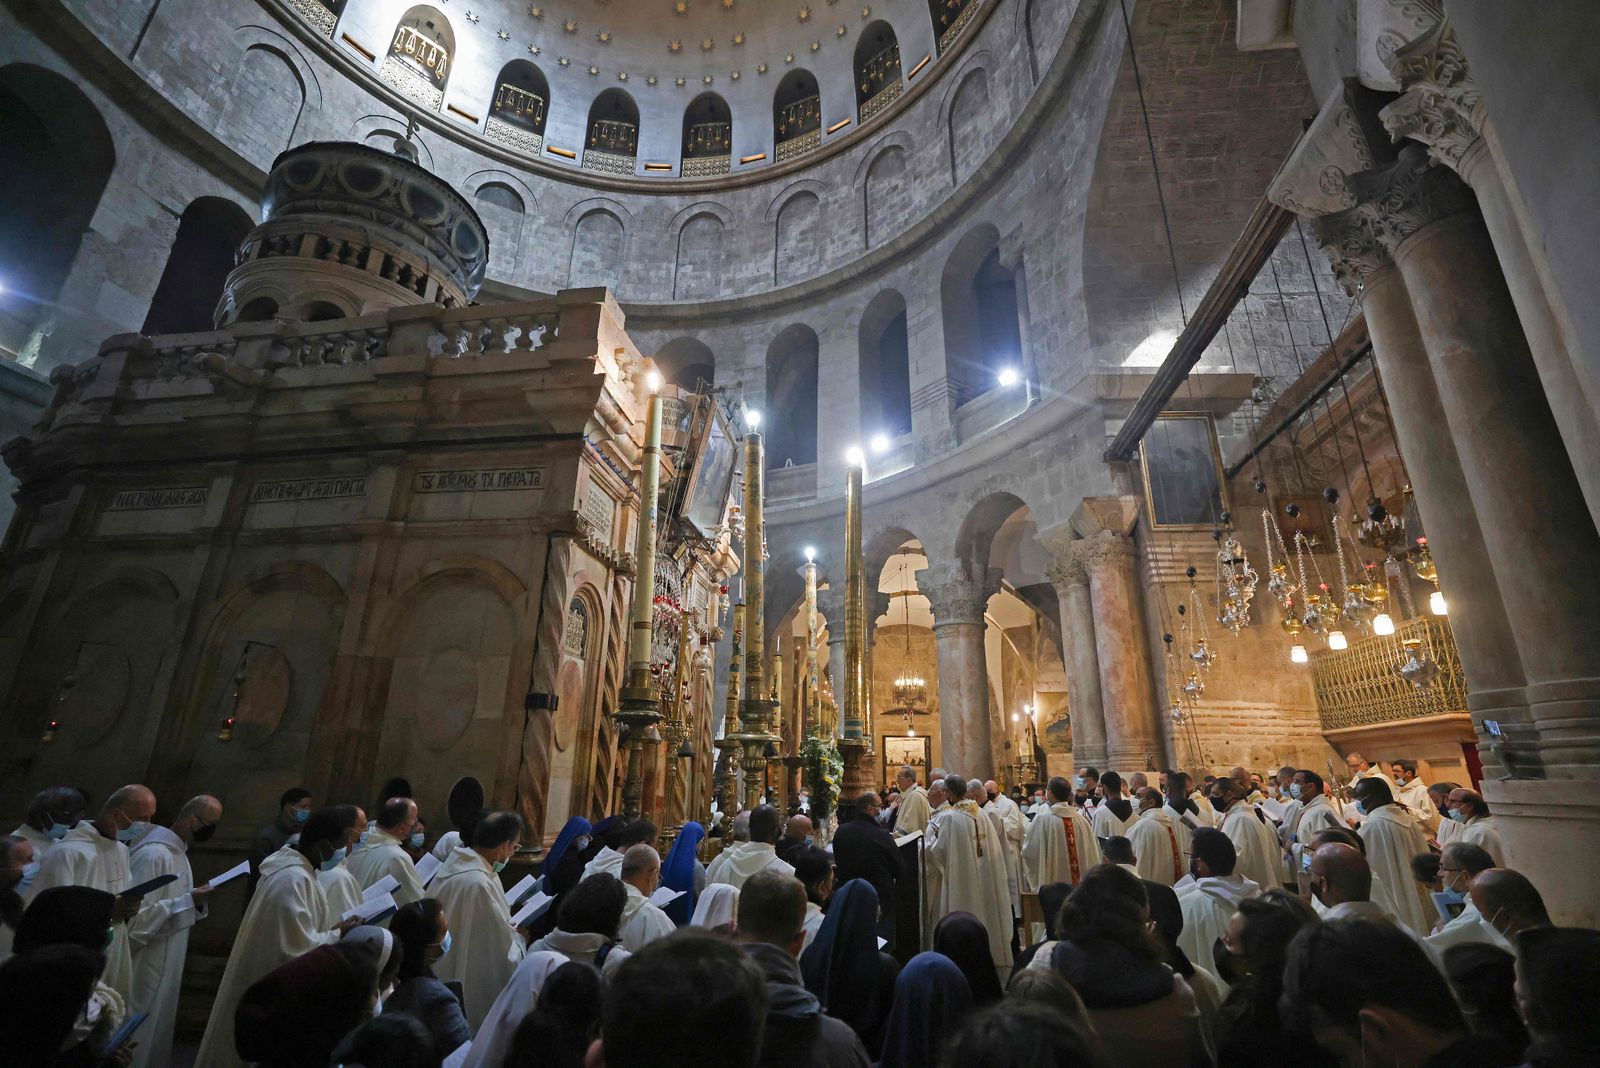 Christian worshippers pray during a mass to commemorate the Washing of the Feet around the Edicule, traditionally believed to be the burial site of Jesus Christ, on Holy Thursday at the Church of the Holy Sepulchre in Jerusalem, on April 1, 2021. - Holy Thursday or Maundy Thursday is the Christian holy day falling on the Thursday before Easter commemorating the Washing of the Feet and the Last Supper of Jesus Christ with the apostles. (Photo by Emmanuel DUNAND / AFP) - AFP